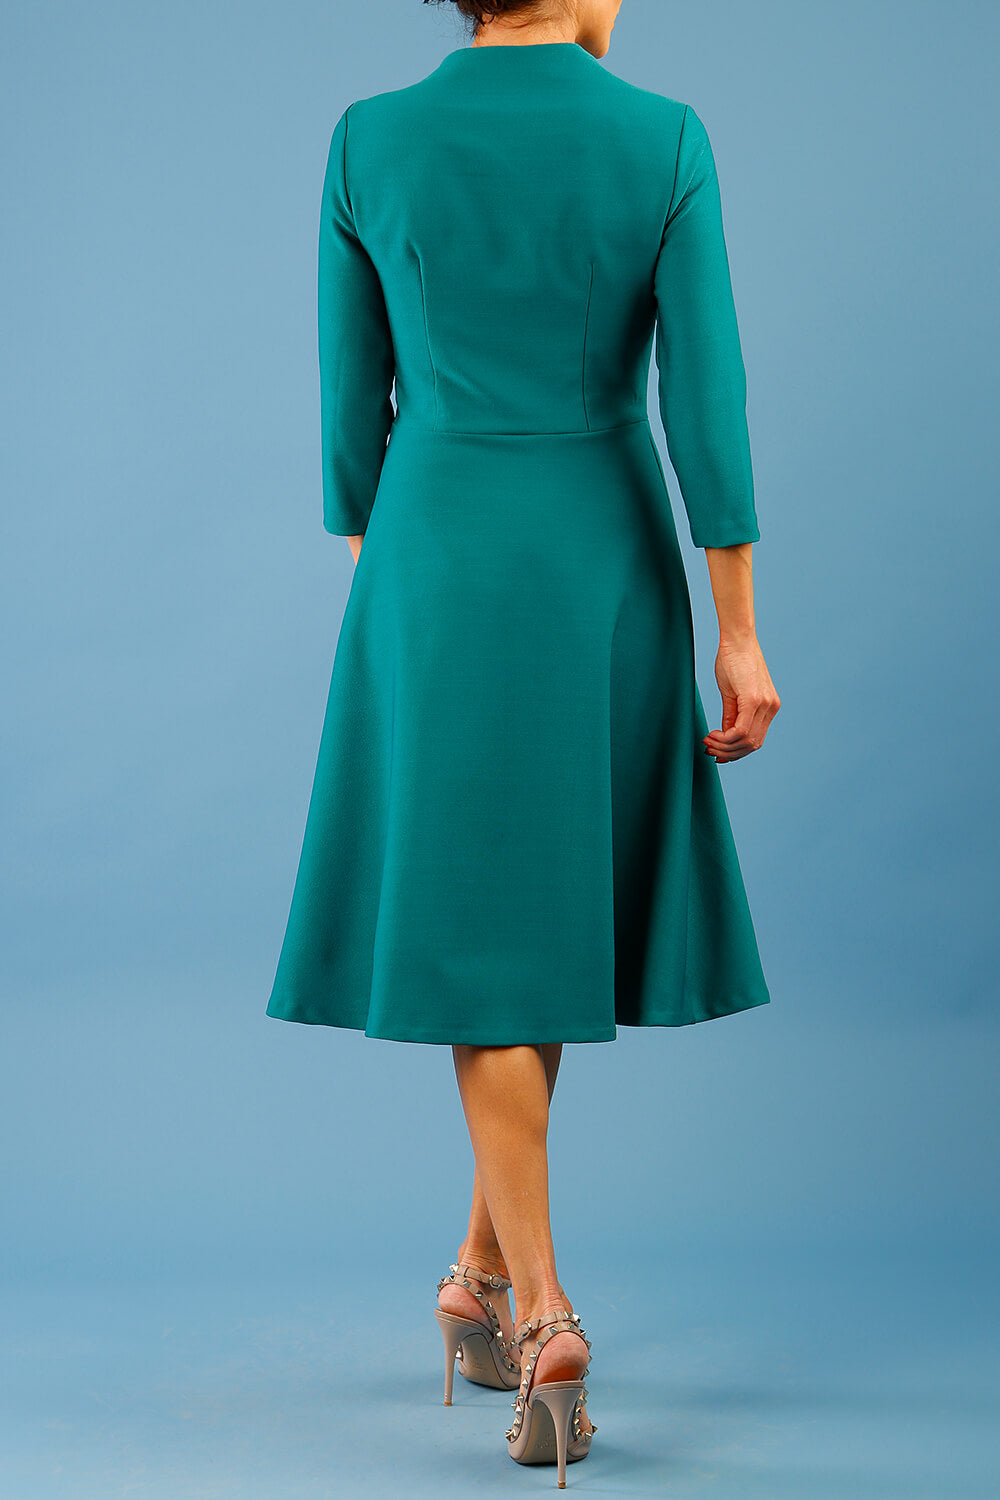 model is wearing diva catwalk palmerston vintage style a-line dress with sleeves and high neck with a slit in pacific green colour back